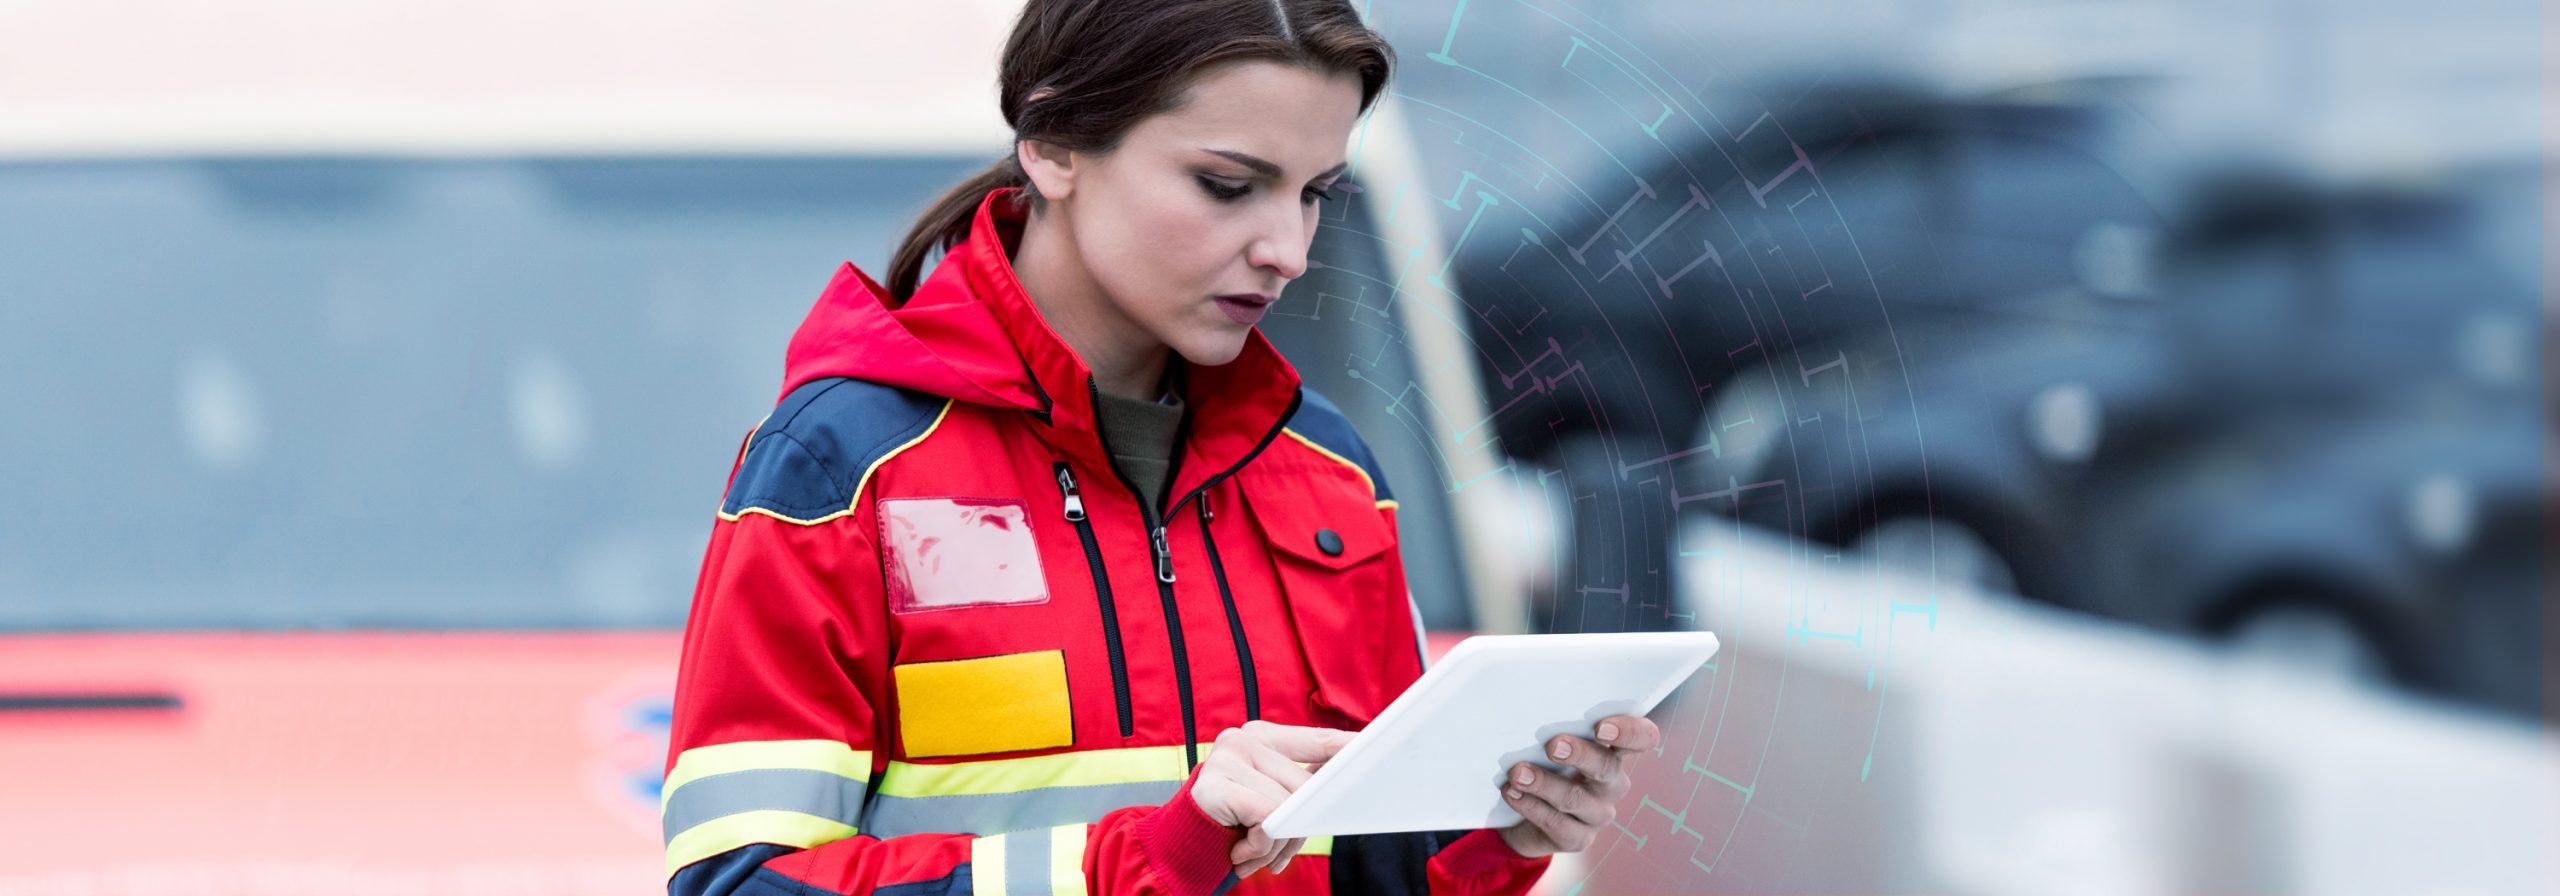 ľAV Achieves AWS Public Safety & Disaster Response Competency